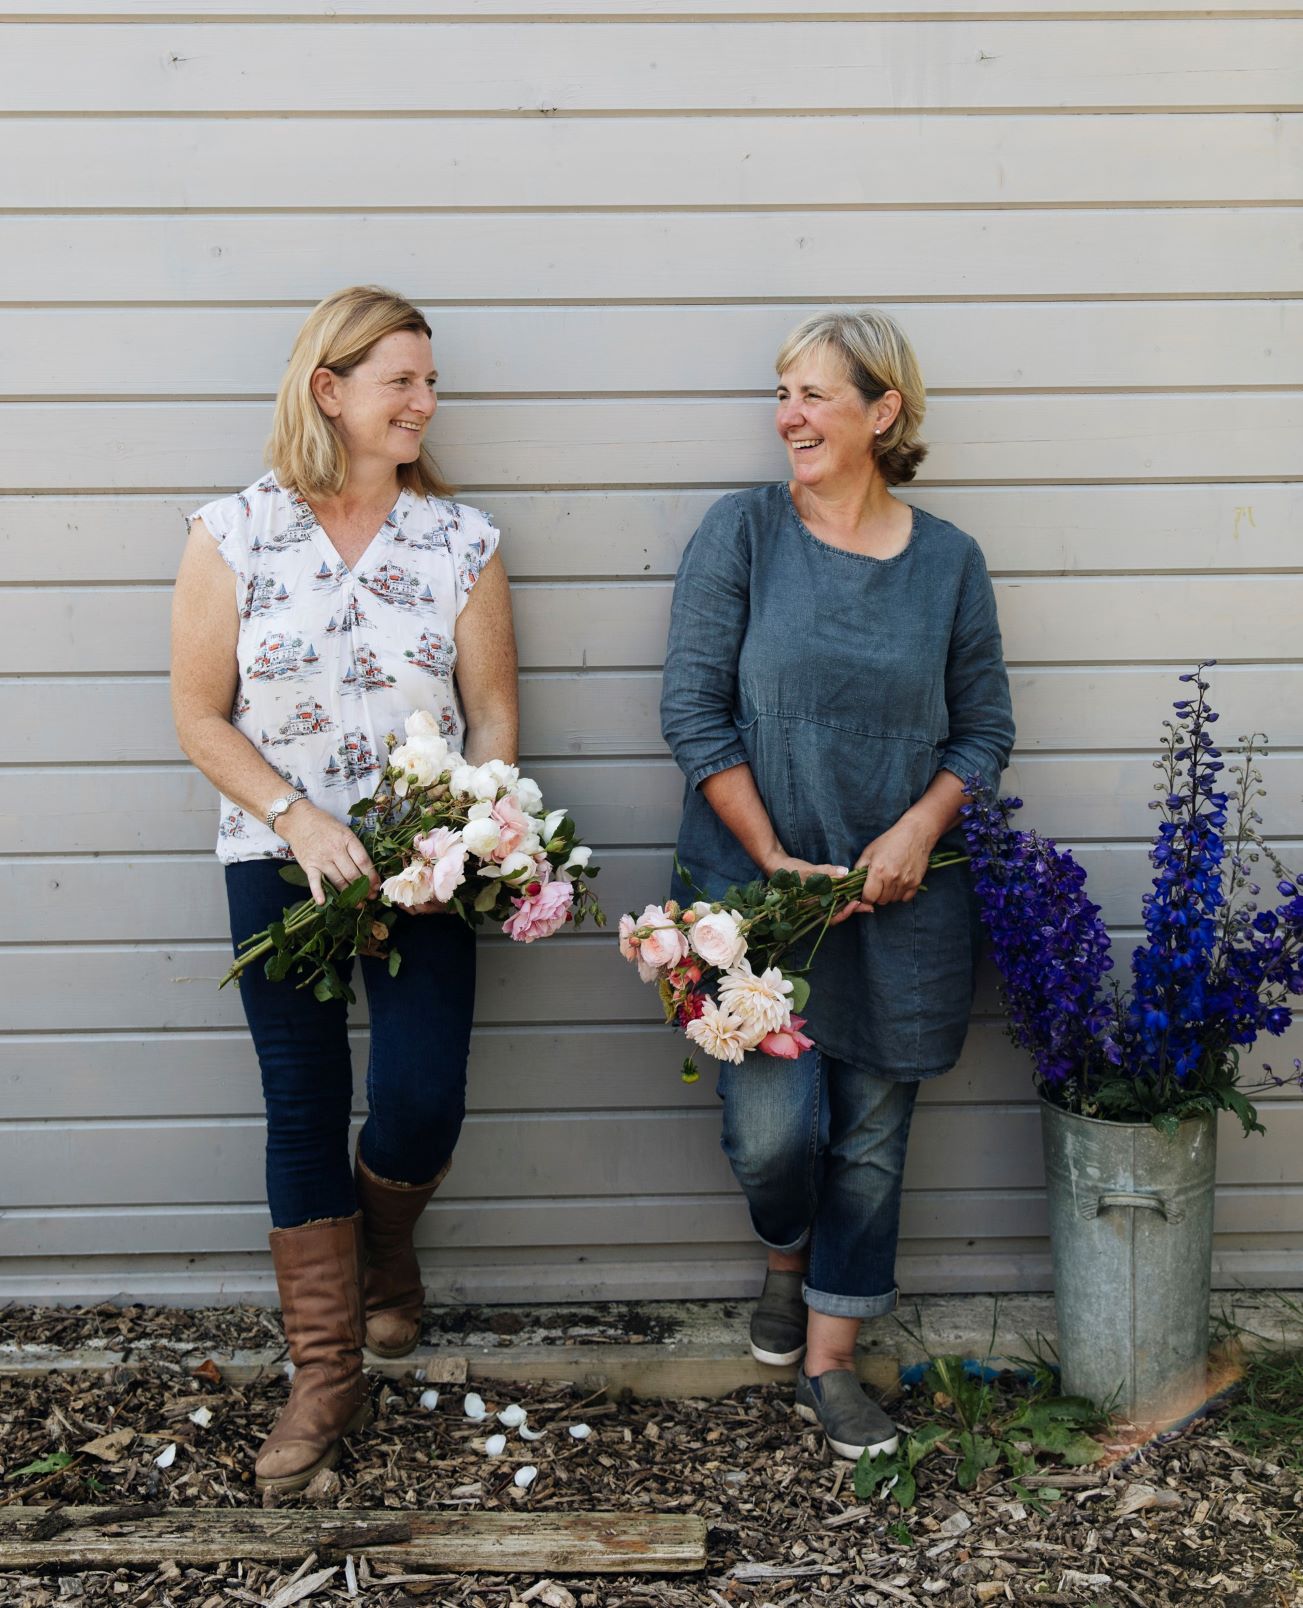 Organic Blooms is having another growth spurt! - a Community ...